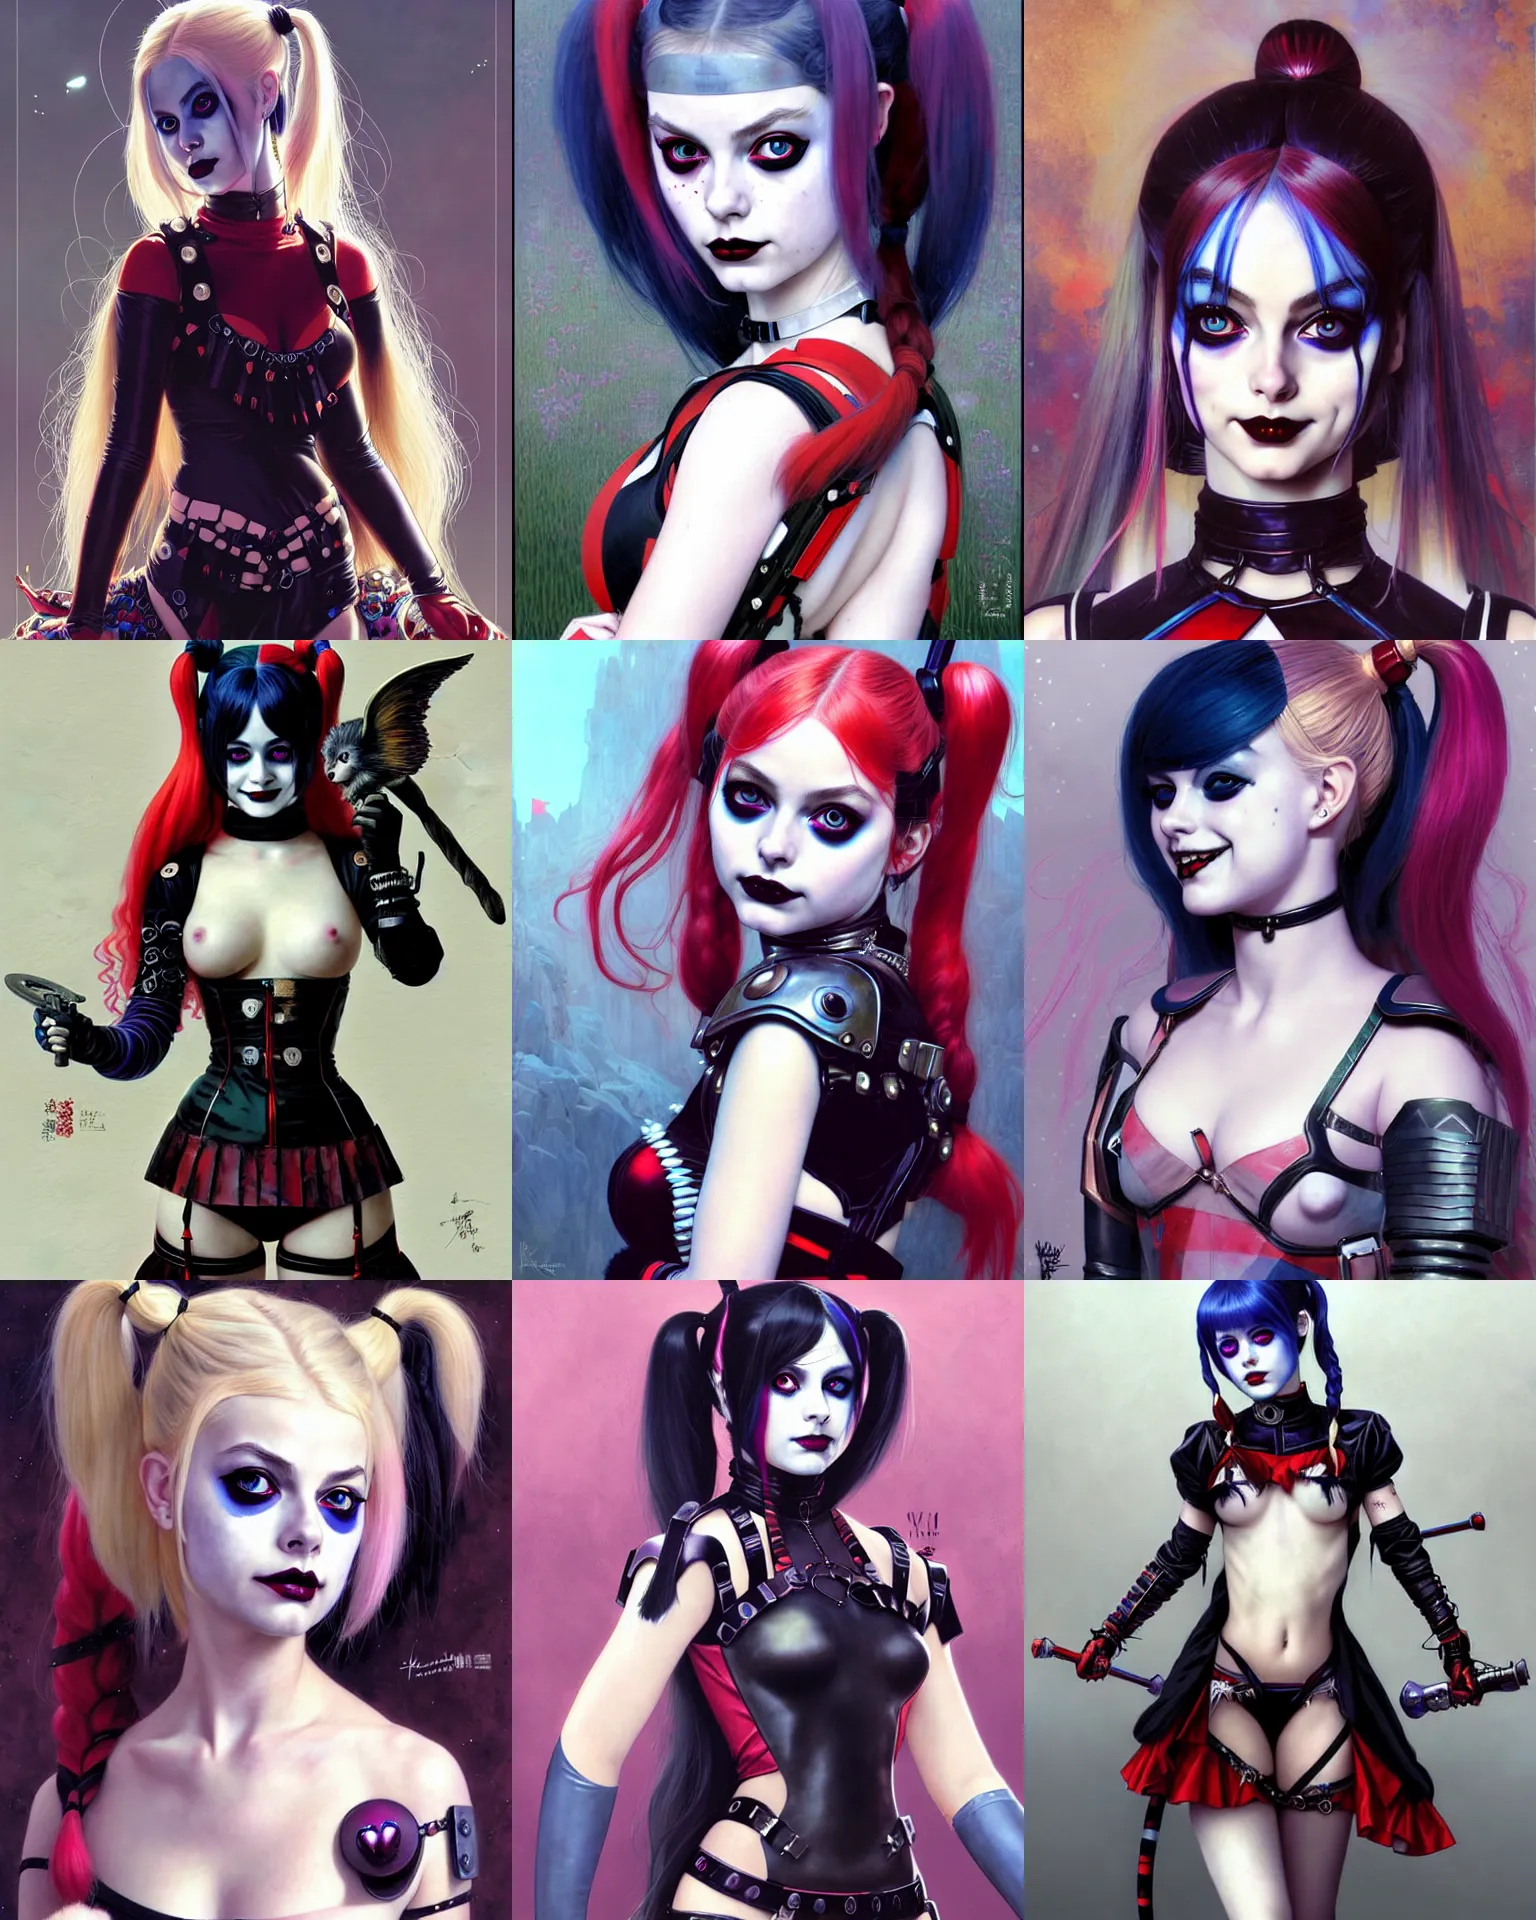 Prompt: portrait of beautiful cute young goth maiden anime harley quinn girl looks like margot robbie in warhammer mechanical armor, high details, art by ( ( ( kuvshinov ilya ) ) ) and wayne barlowe and gustav klimt and artgerm and wlop and william - adolphe bouguereau